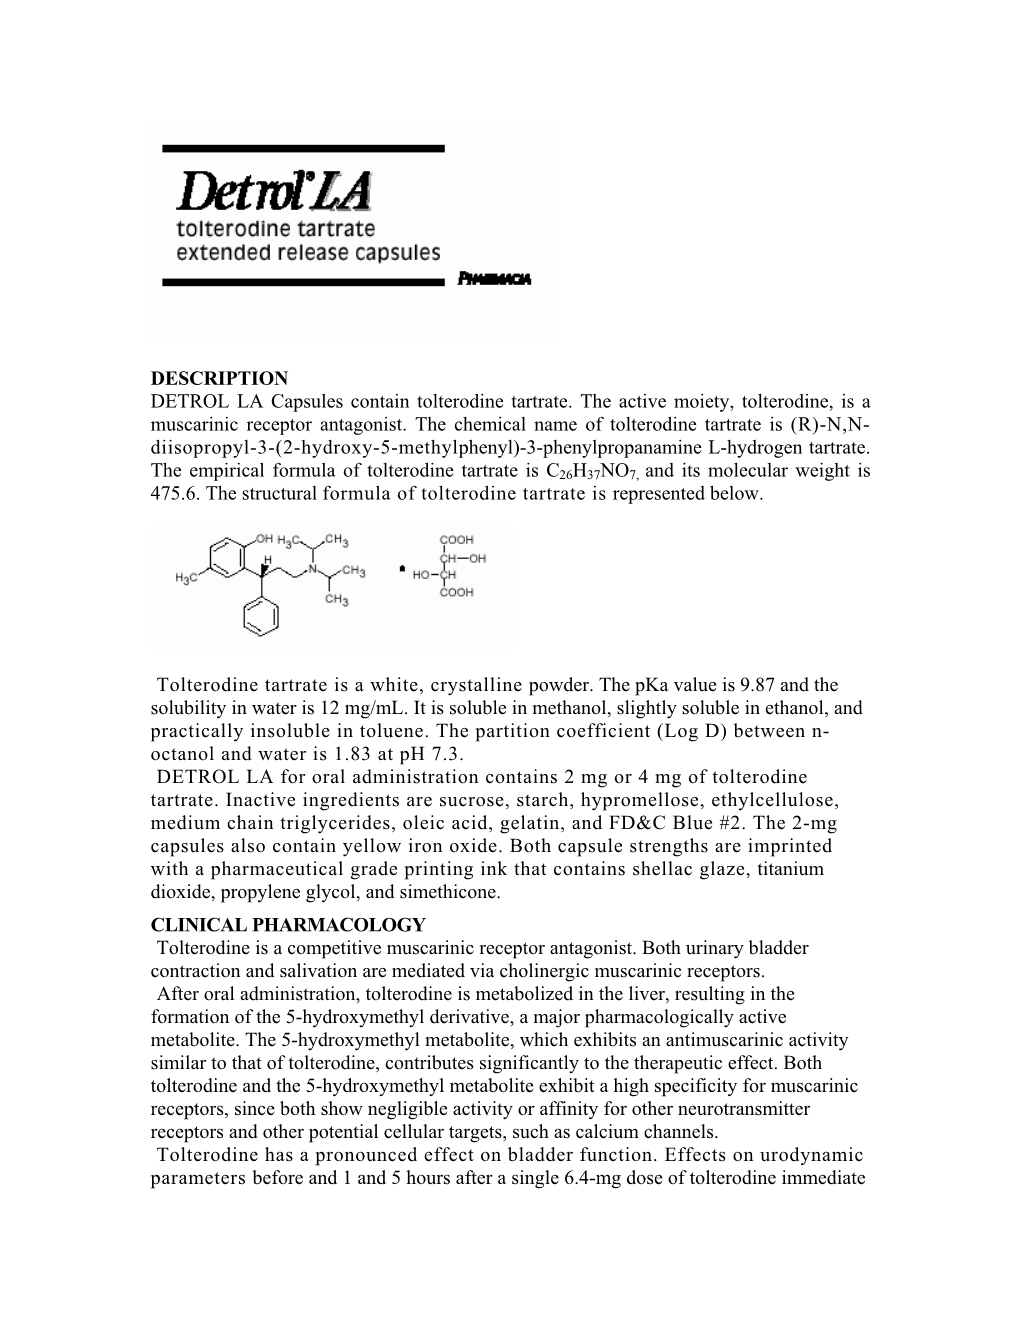 DESCRIPTION DETROL LA Capsules Contain Tolterodine Tartrate. the Active Moiety, Tolterodine, Is a Muscarinic Receptor Antagonist